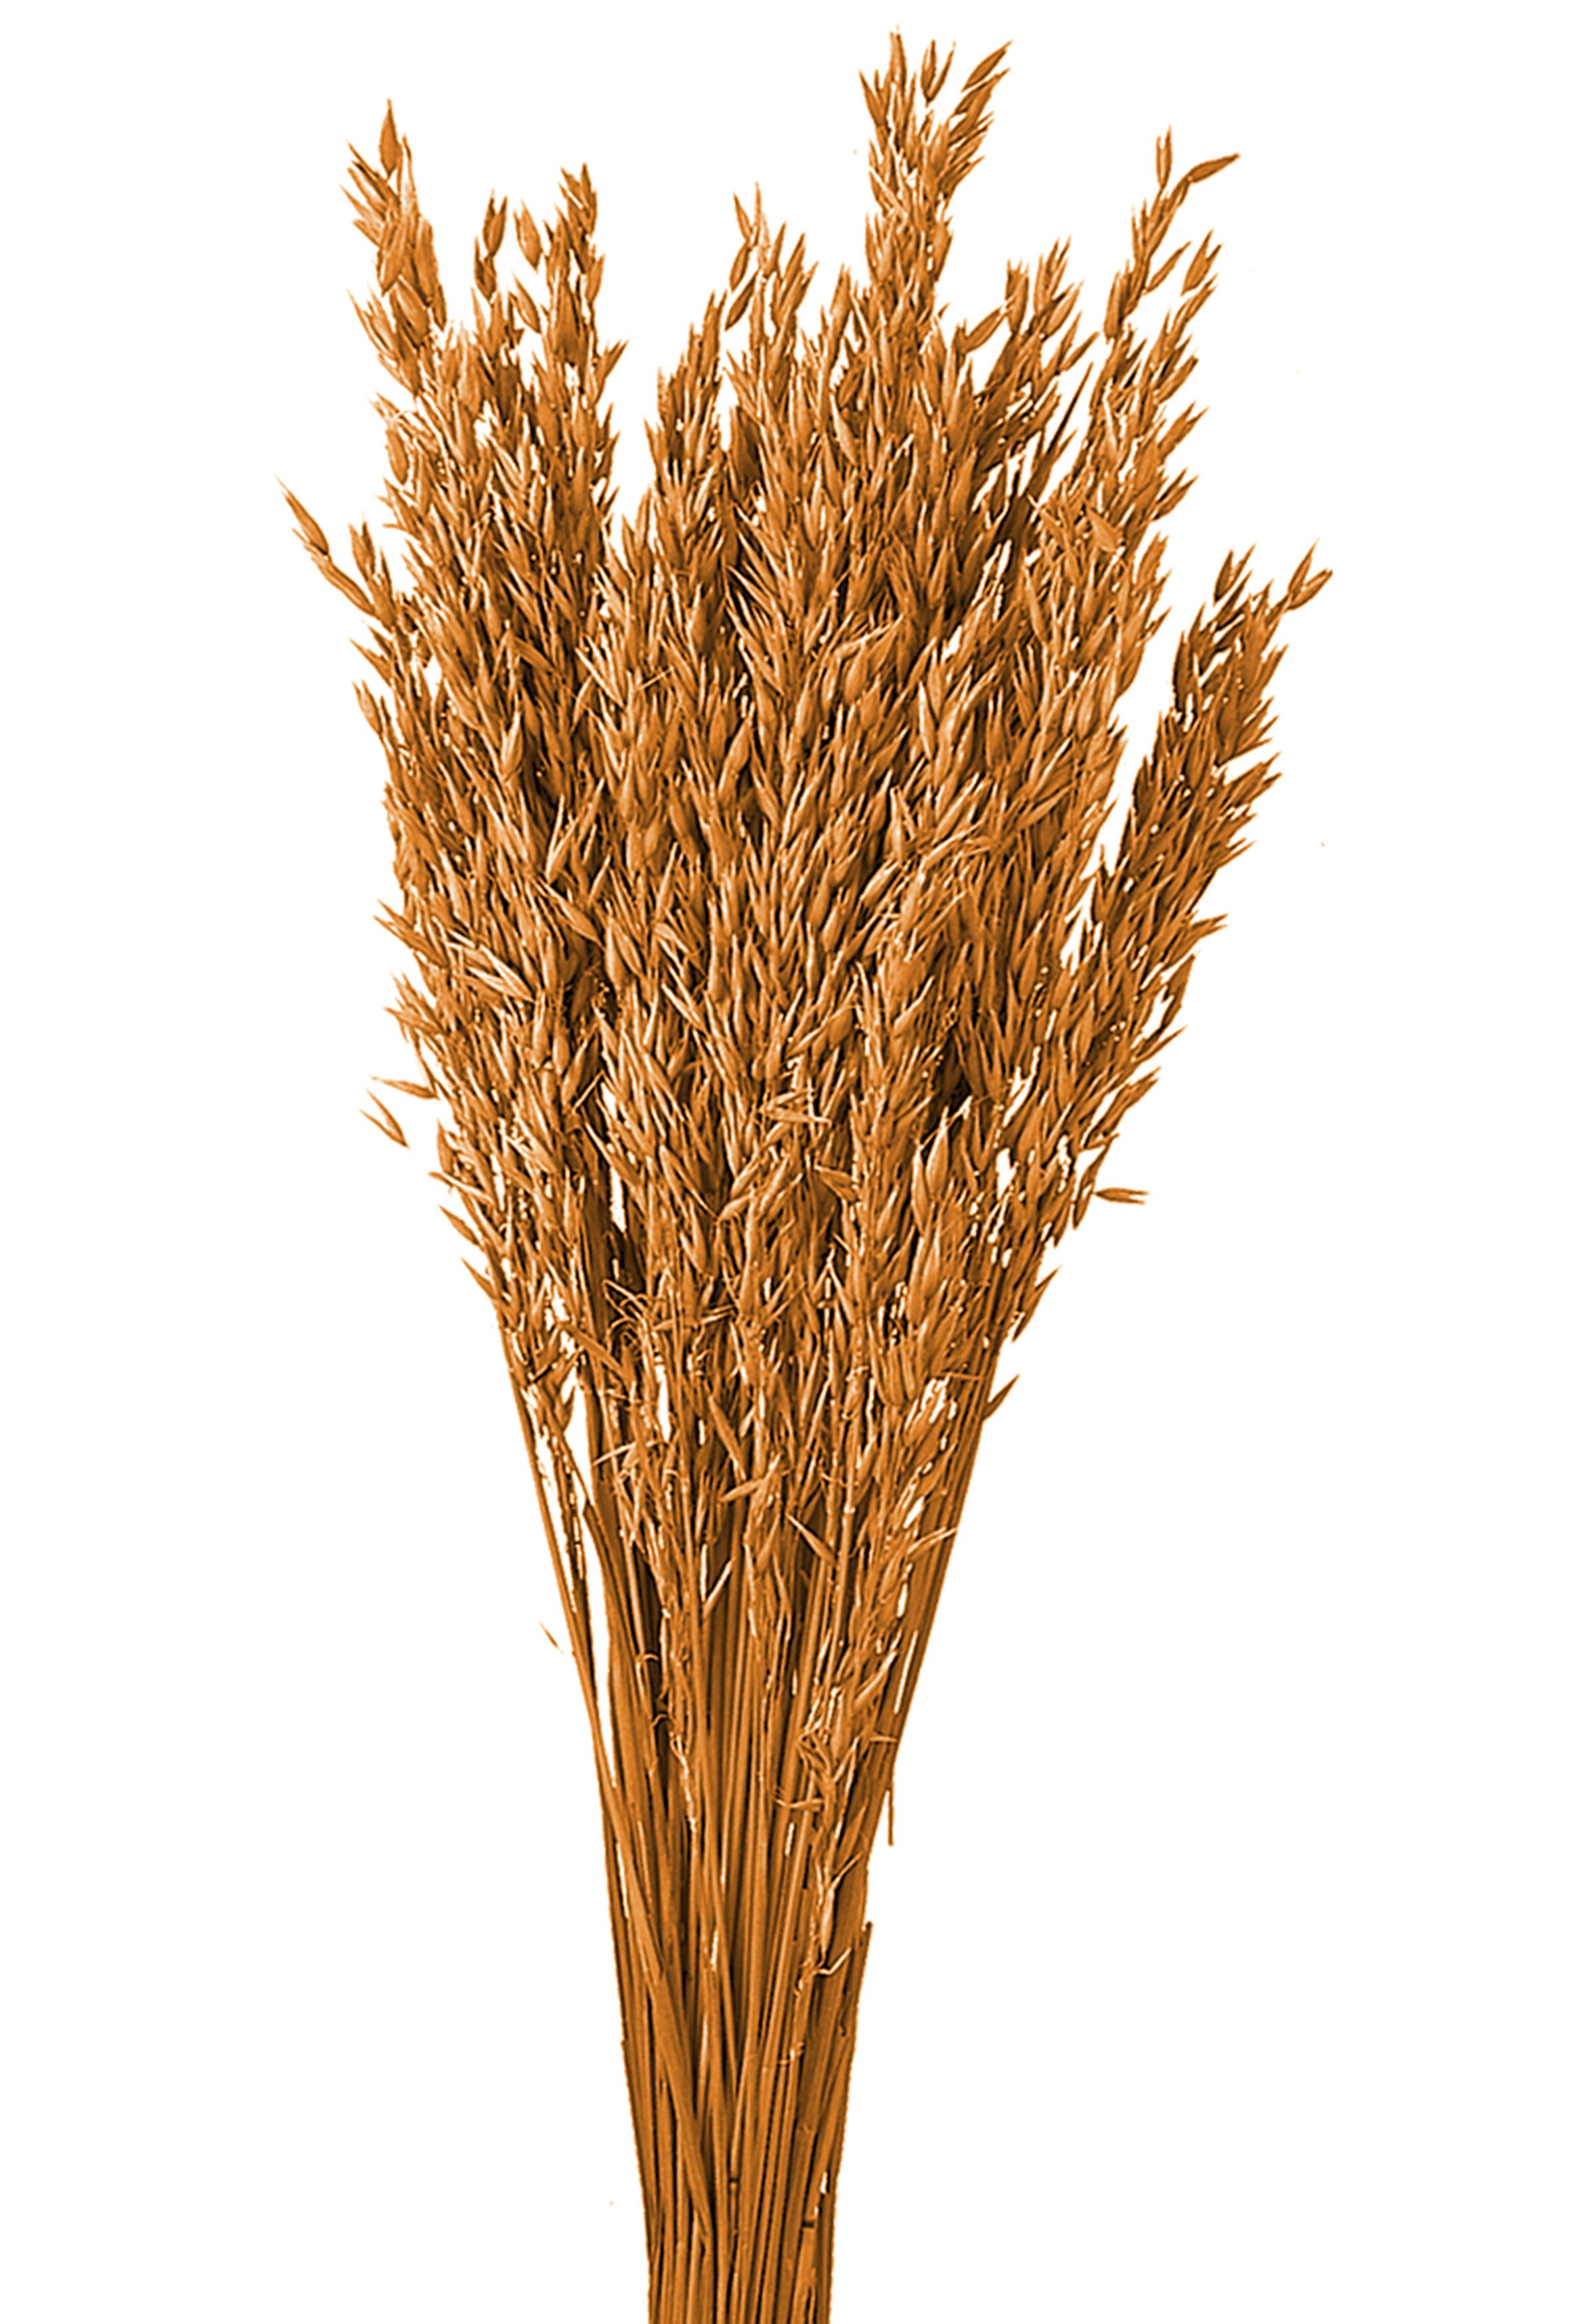 NATURAL PRODUCTS DRIED FLOWERS AND ERBS, COLORED GRASS AND FLOWERS, AVENA COLTIVATA SBIAN/COL A KG.